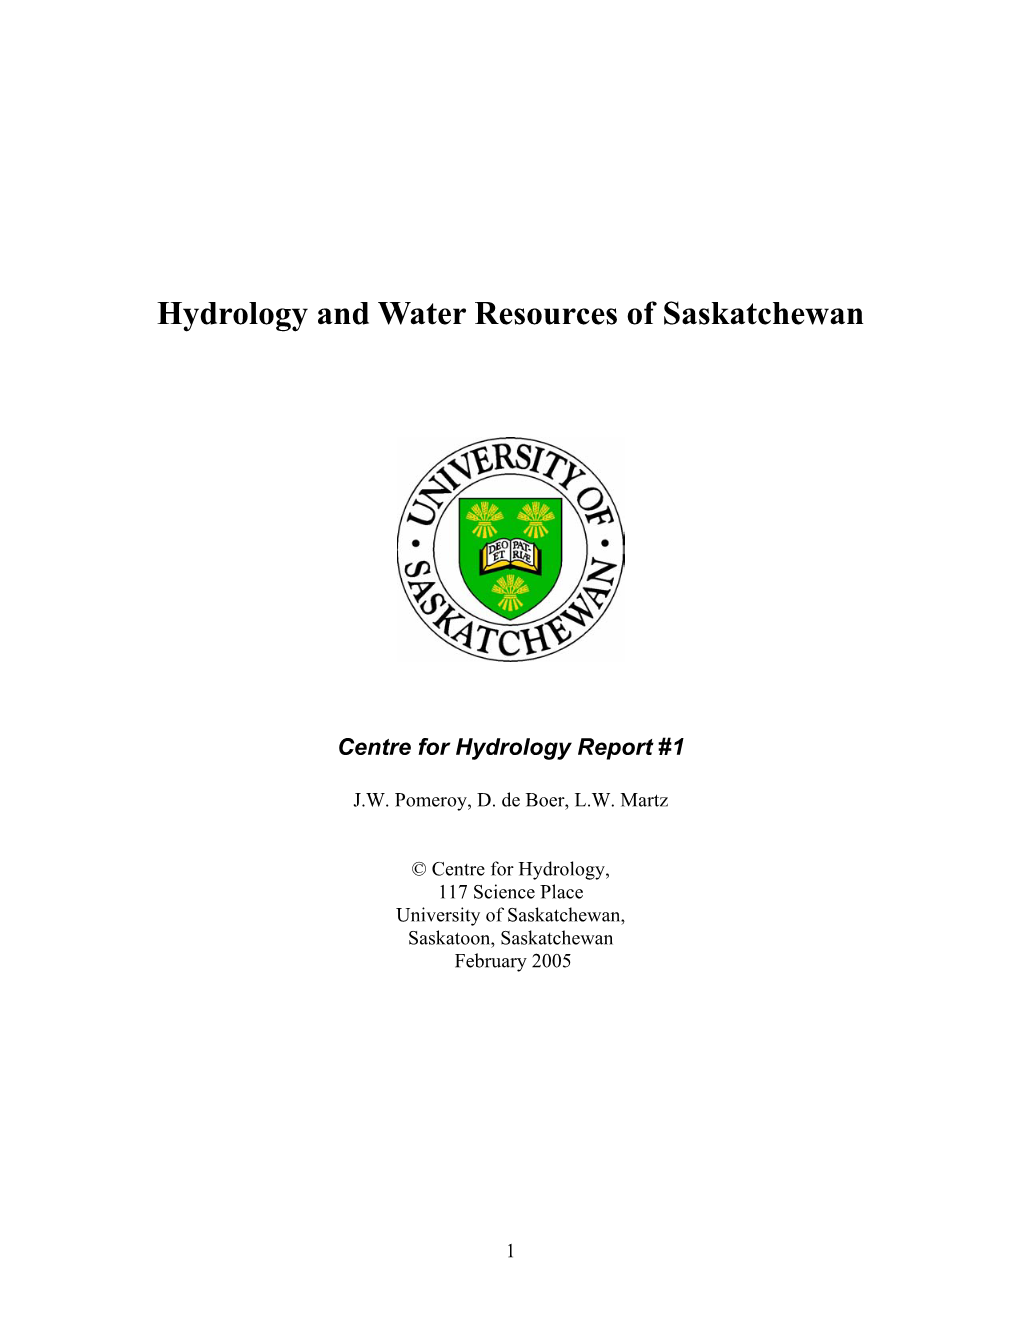 Hydrology and Water Resources of Saskatchewan